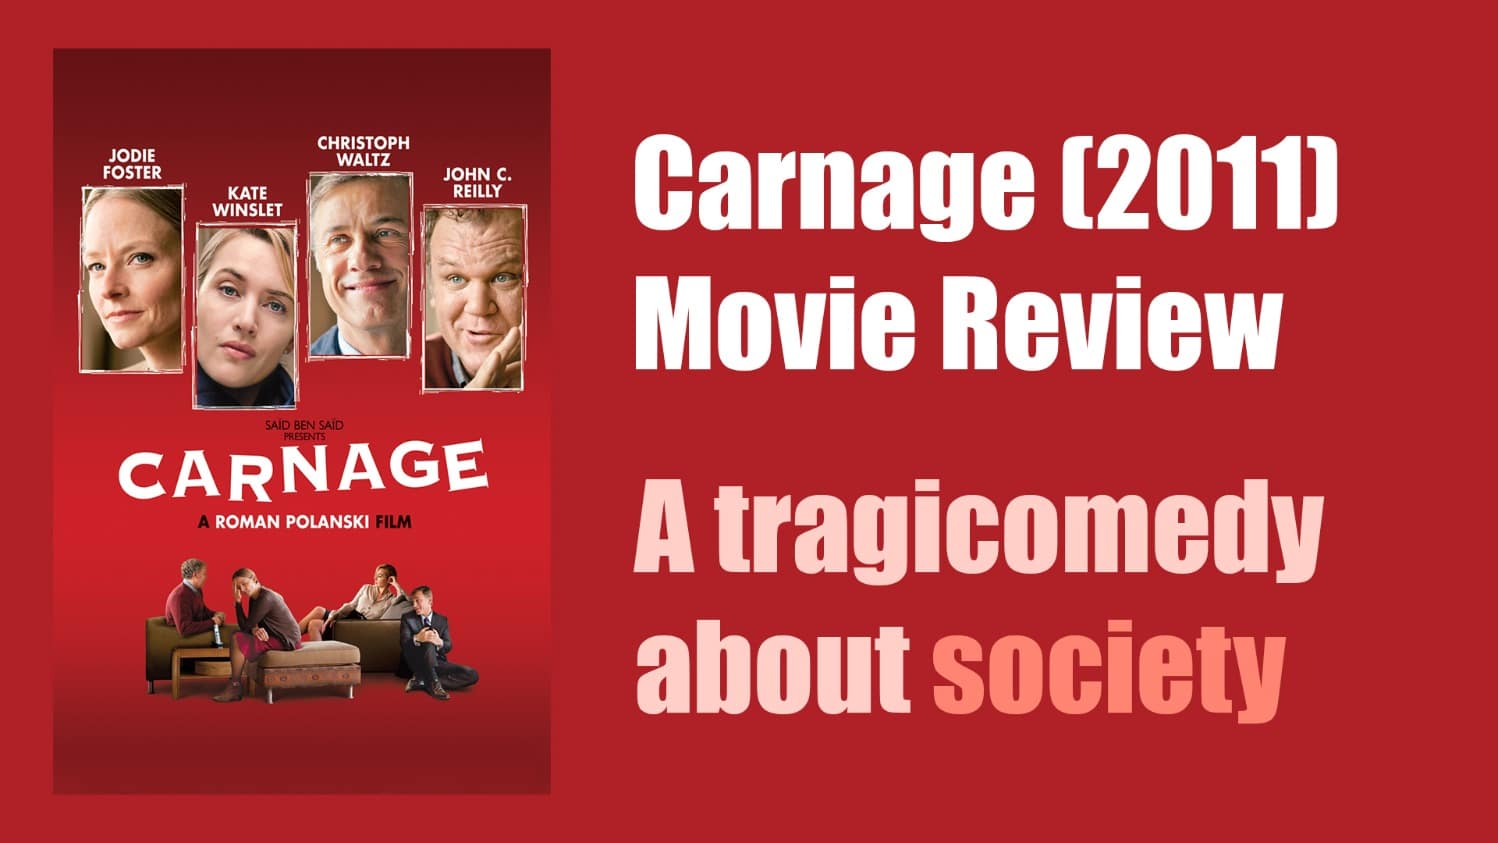 jodie foster john reilly kate winslet christoph waltz carnage 2011 movie review